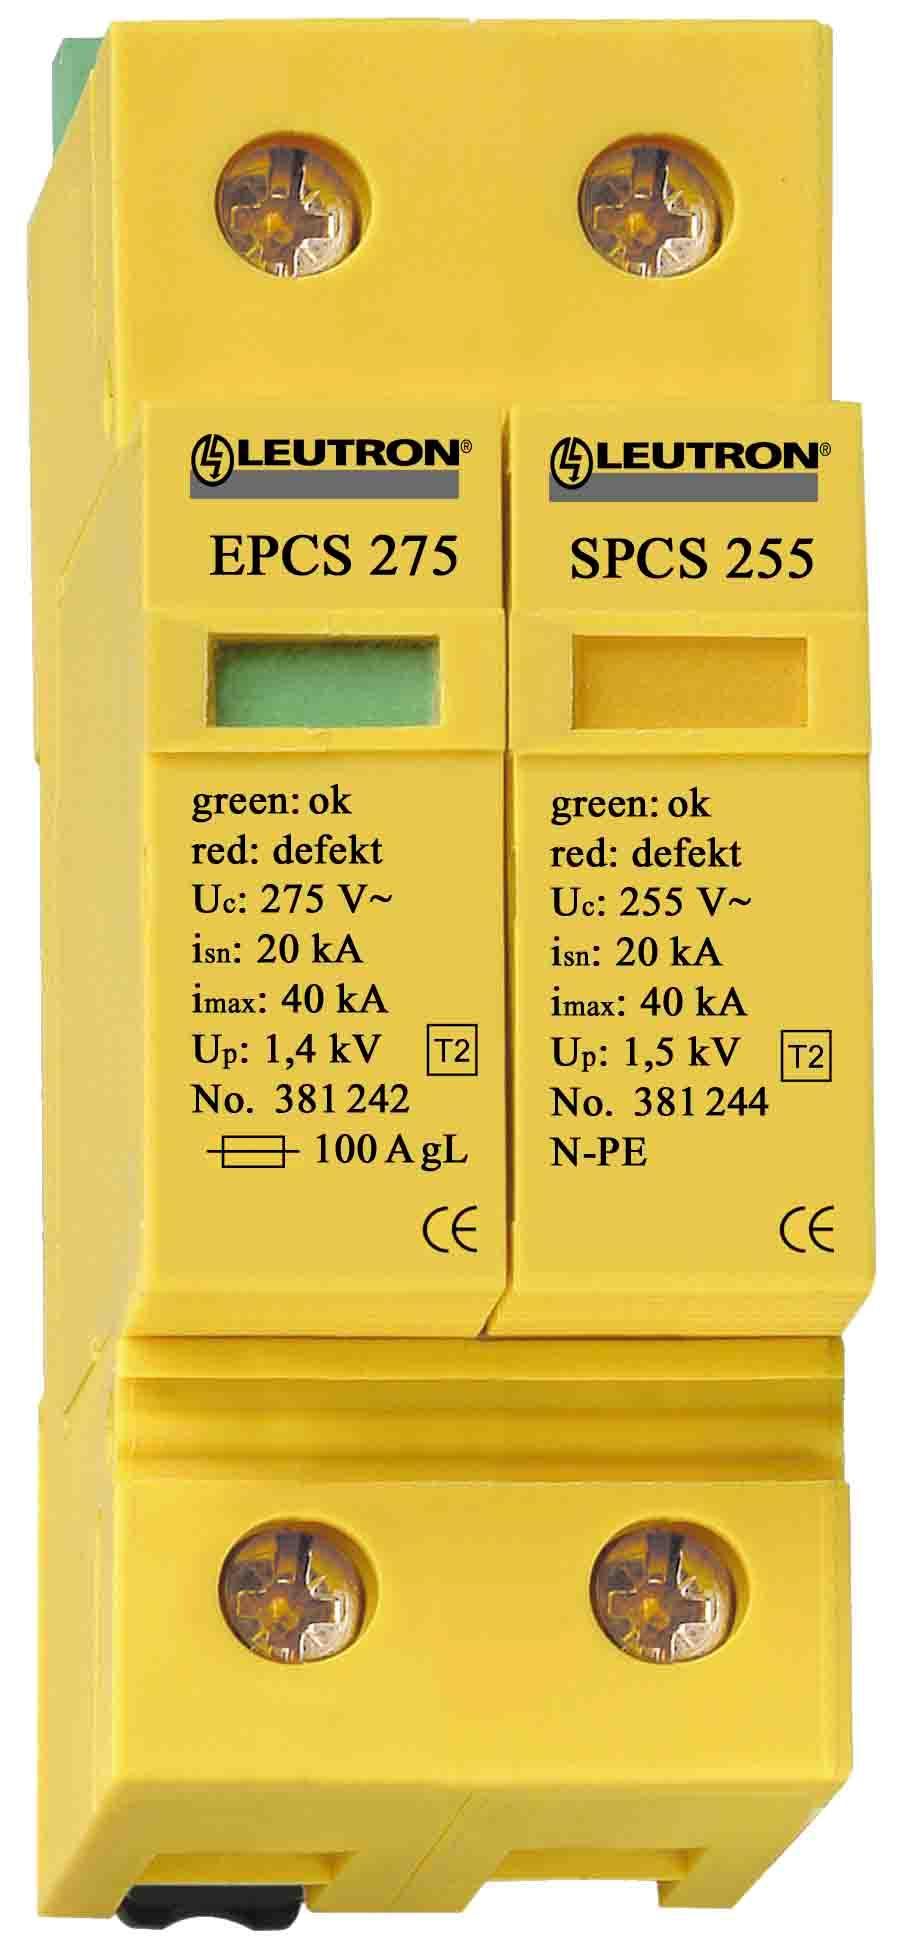 Surge Protection EnerPro C S pluggable EP C S TT 275 (/FM) EP C S TT1+1 275 (/FM) Pluggable combined multi-pole Surge Protective Device meeting the requirements of protection category T2 (C), class